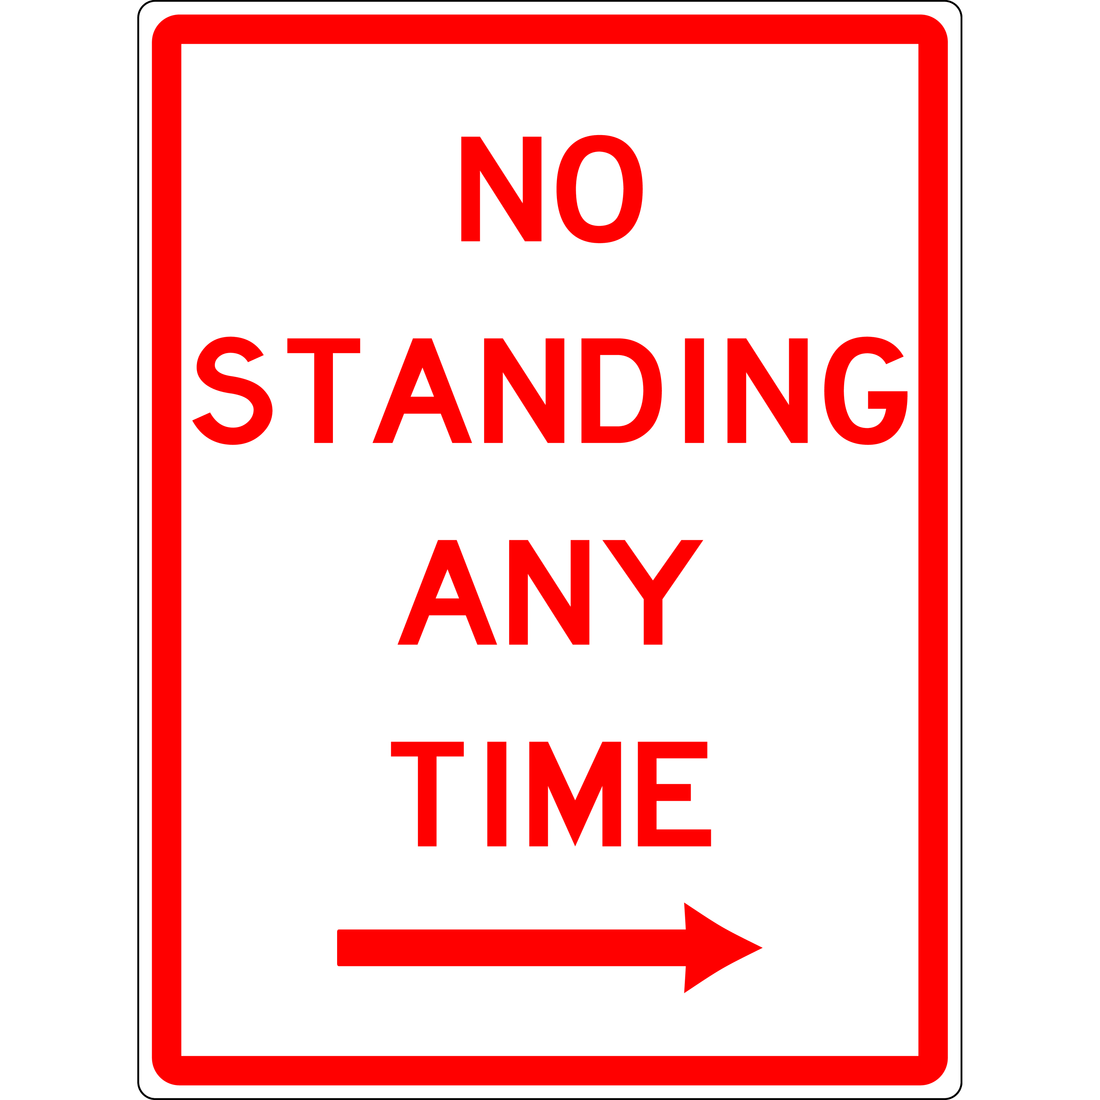 CARPARK-NO-STANDING-AT-ANY-TIME-_RIGHT-ARROW_